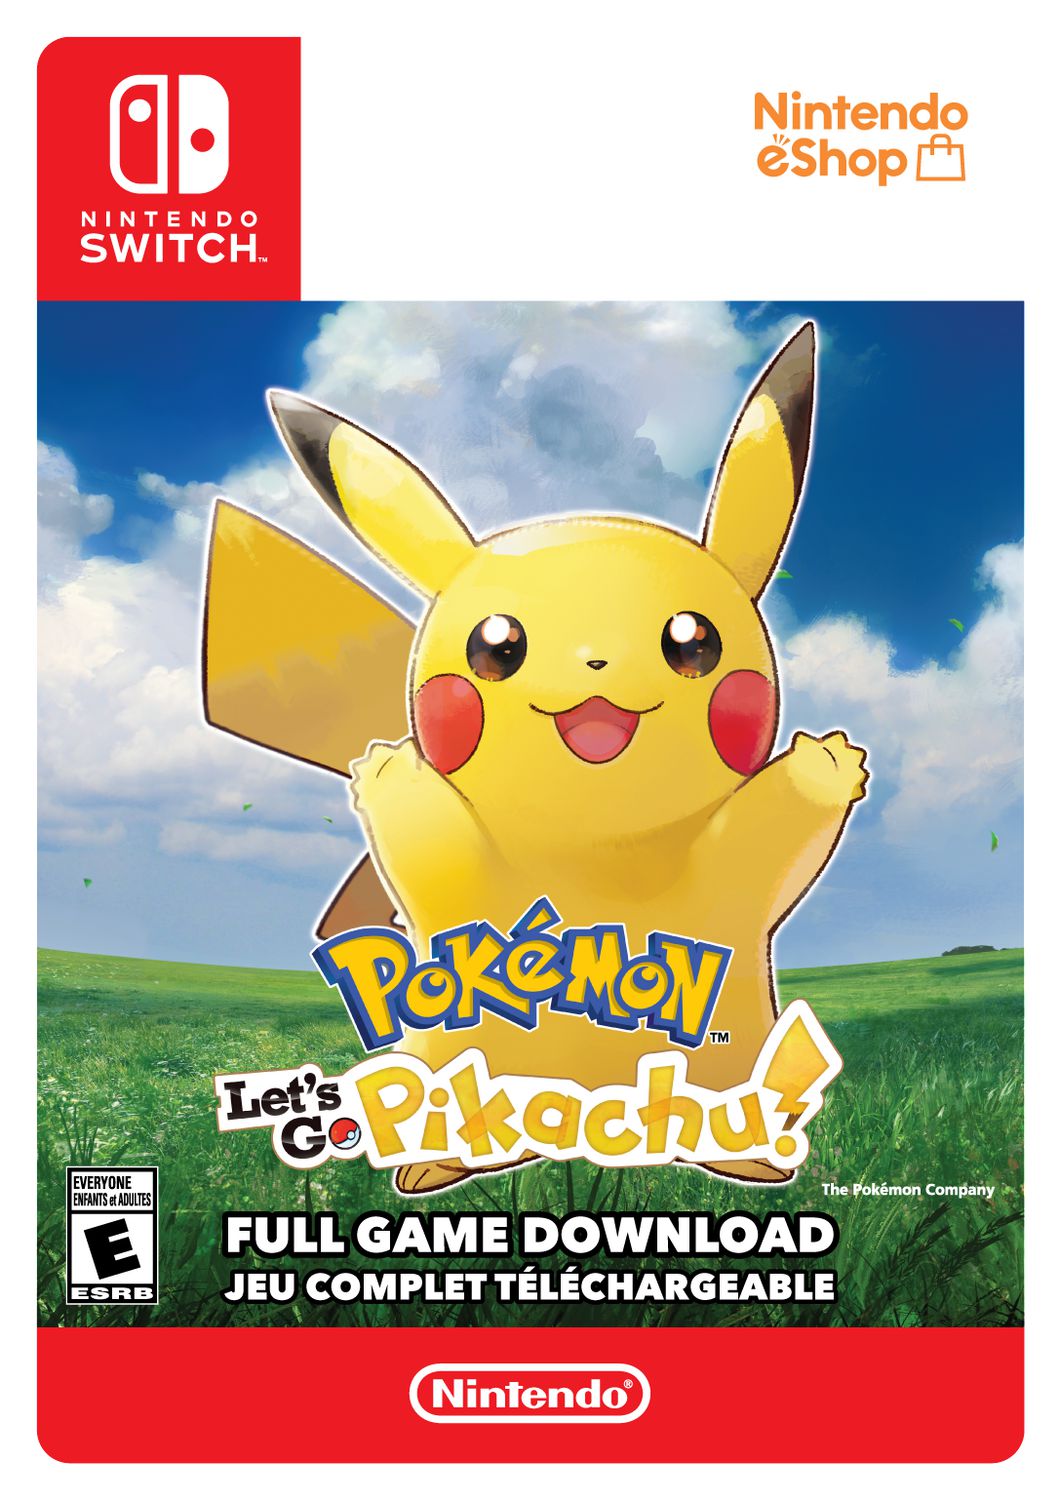 nintendo switch and let's go pikachu